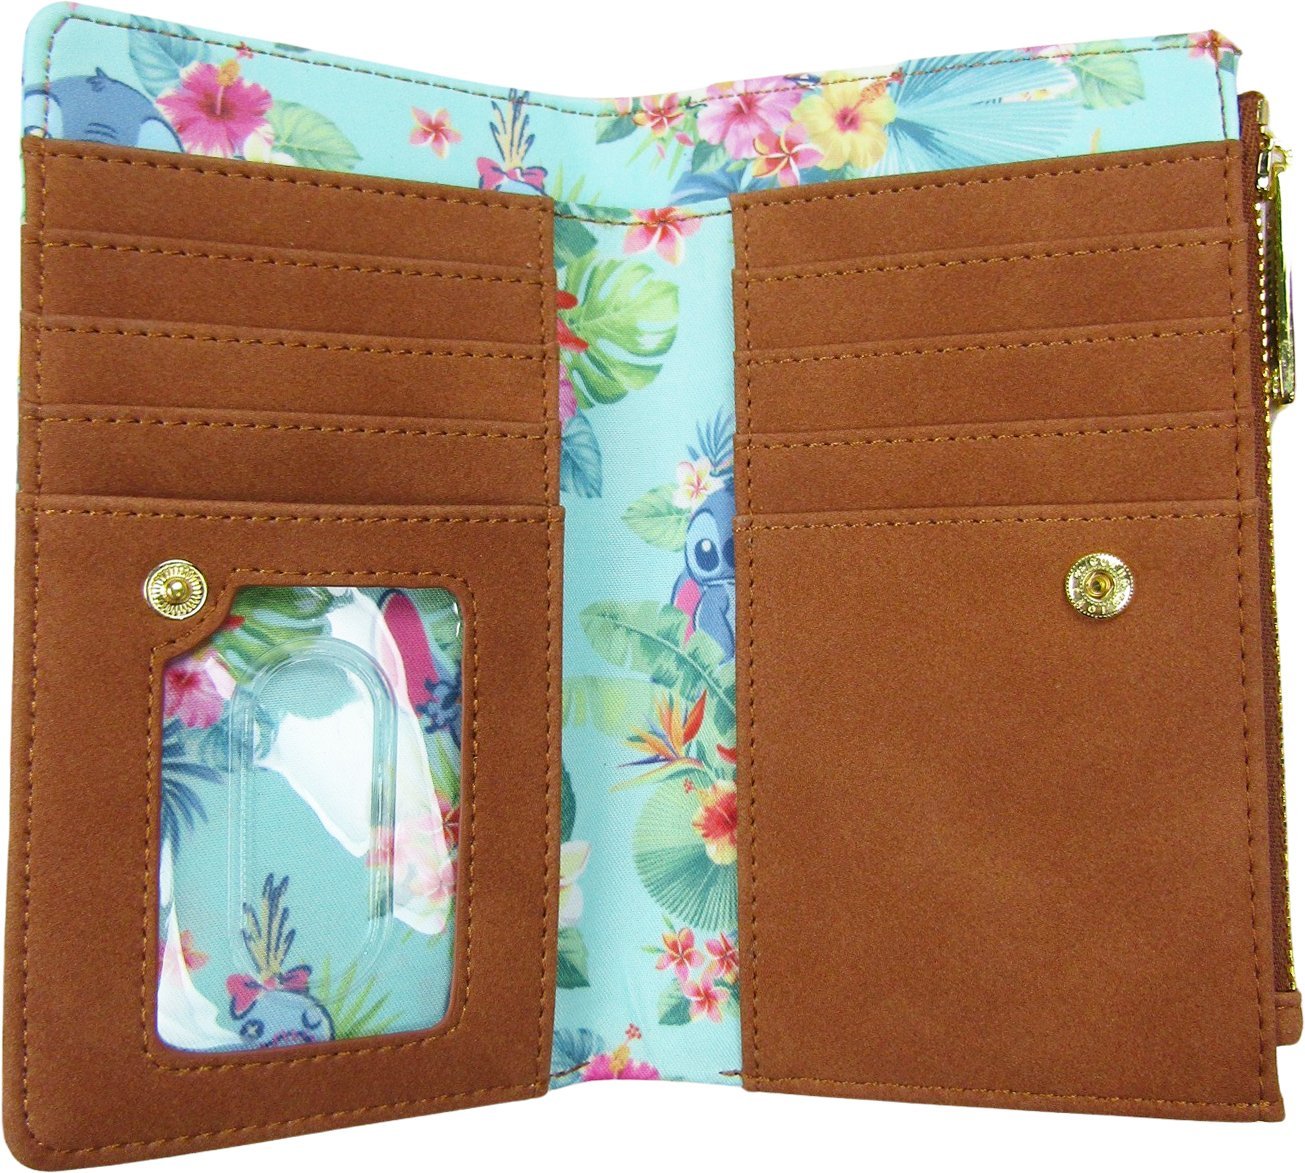 707 Street Exclusive - Loungefly Disney Lilo & Stitch Mint Floral Allover Print Flap Wallet - Interior